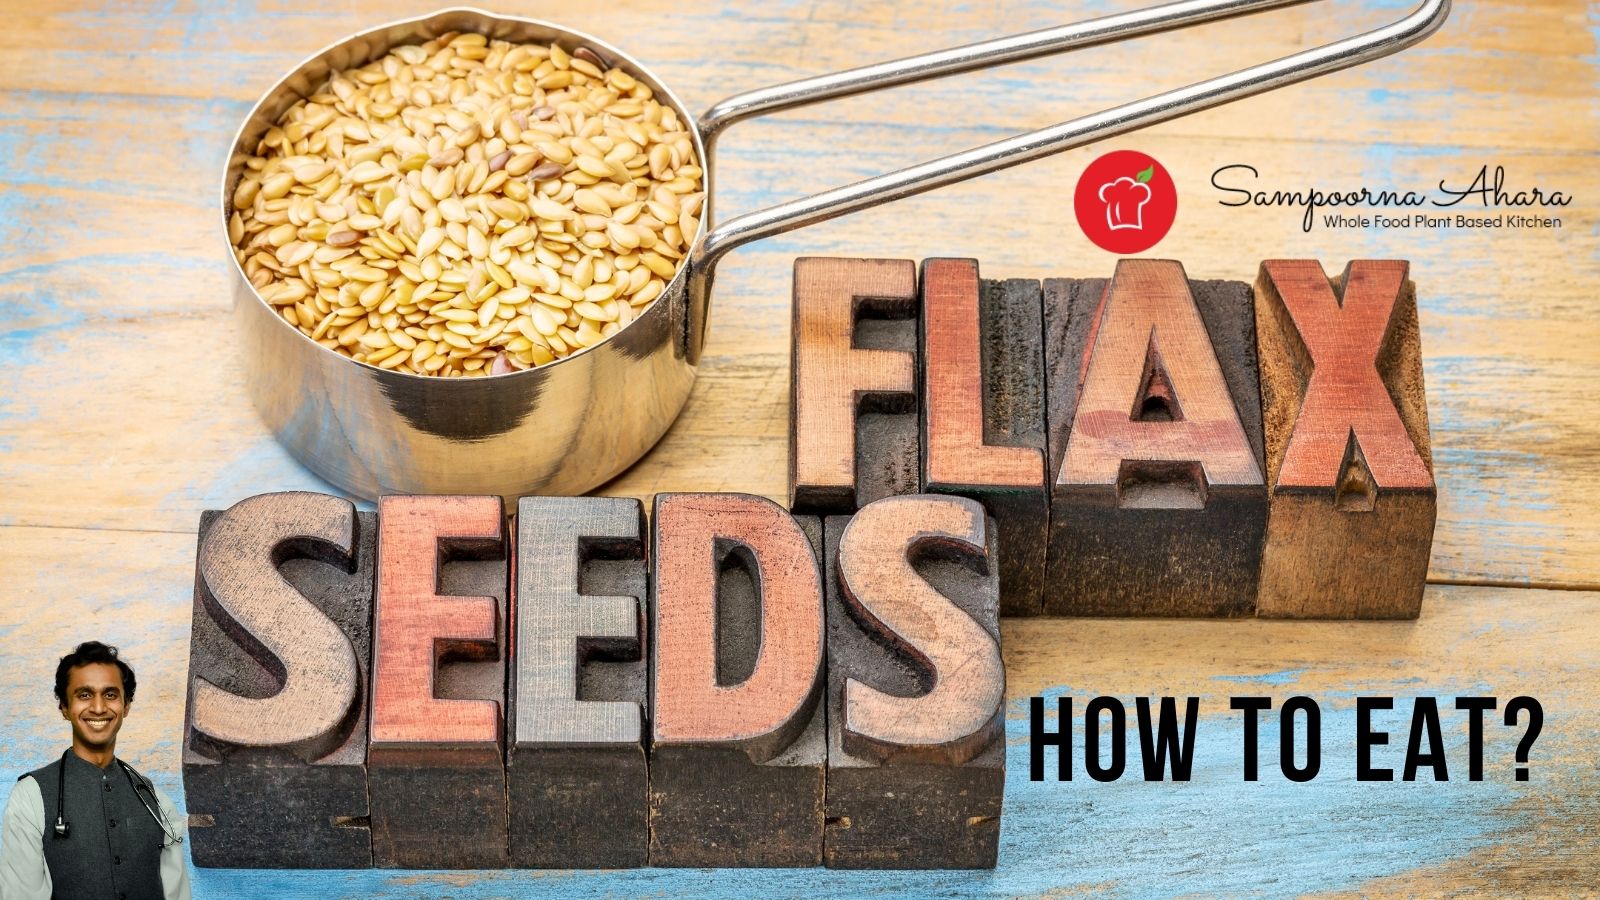 How to Eat Flaxseed?